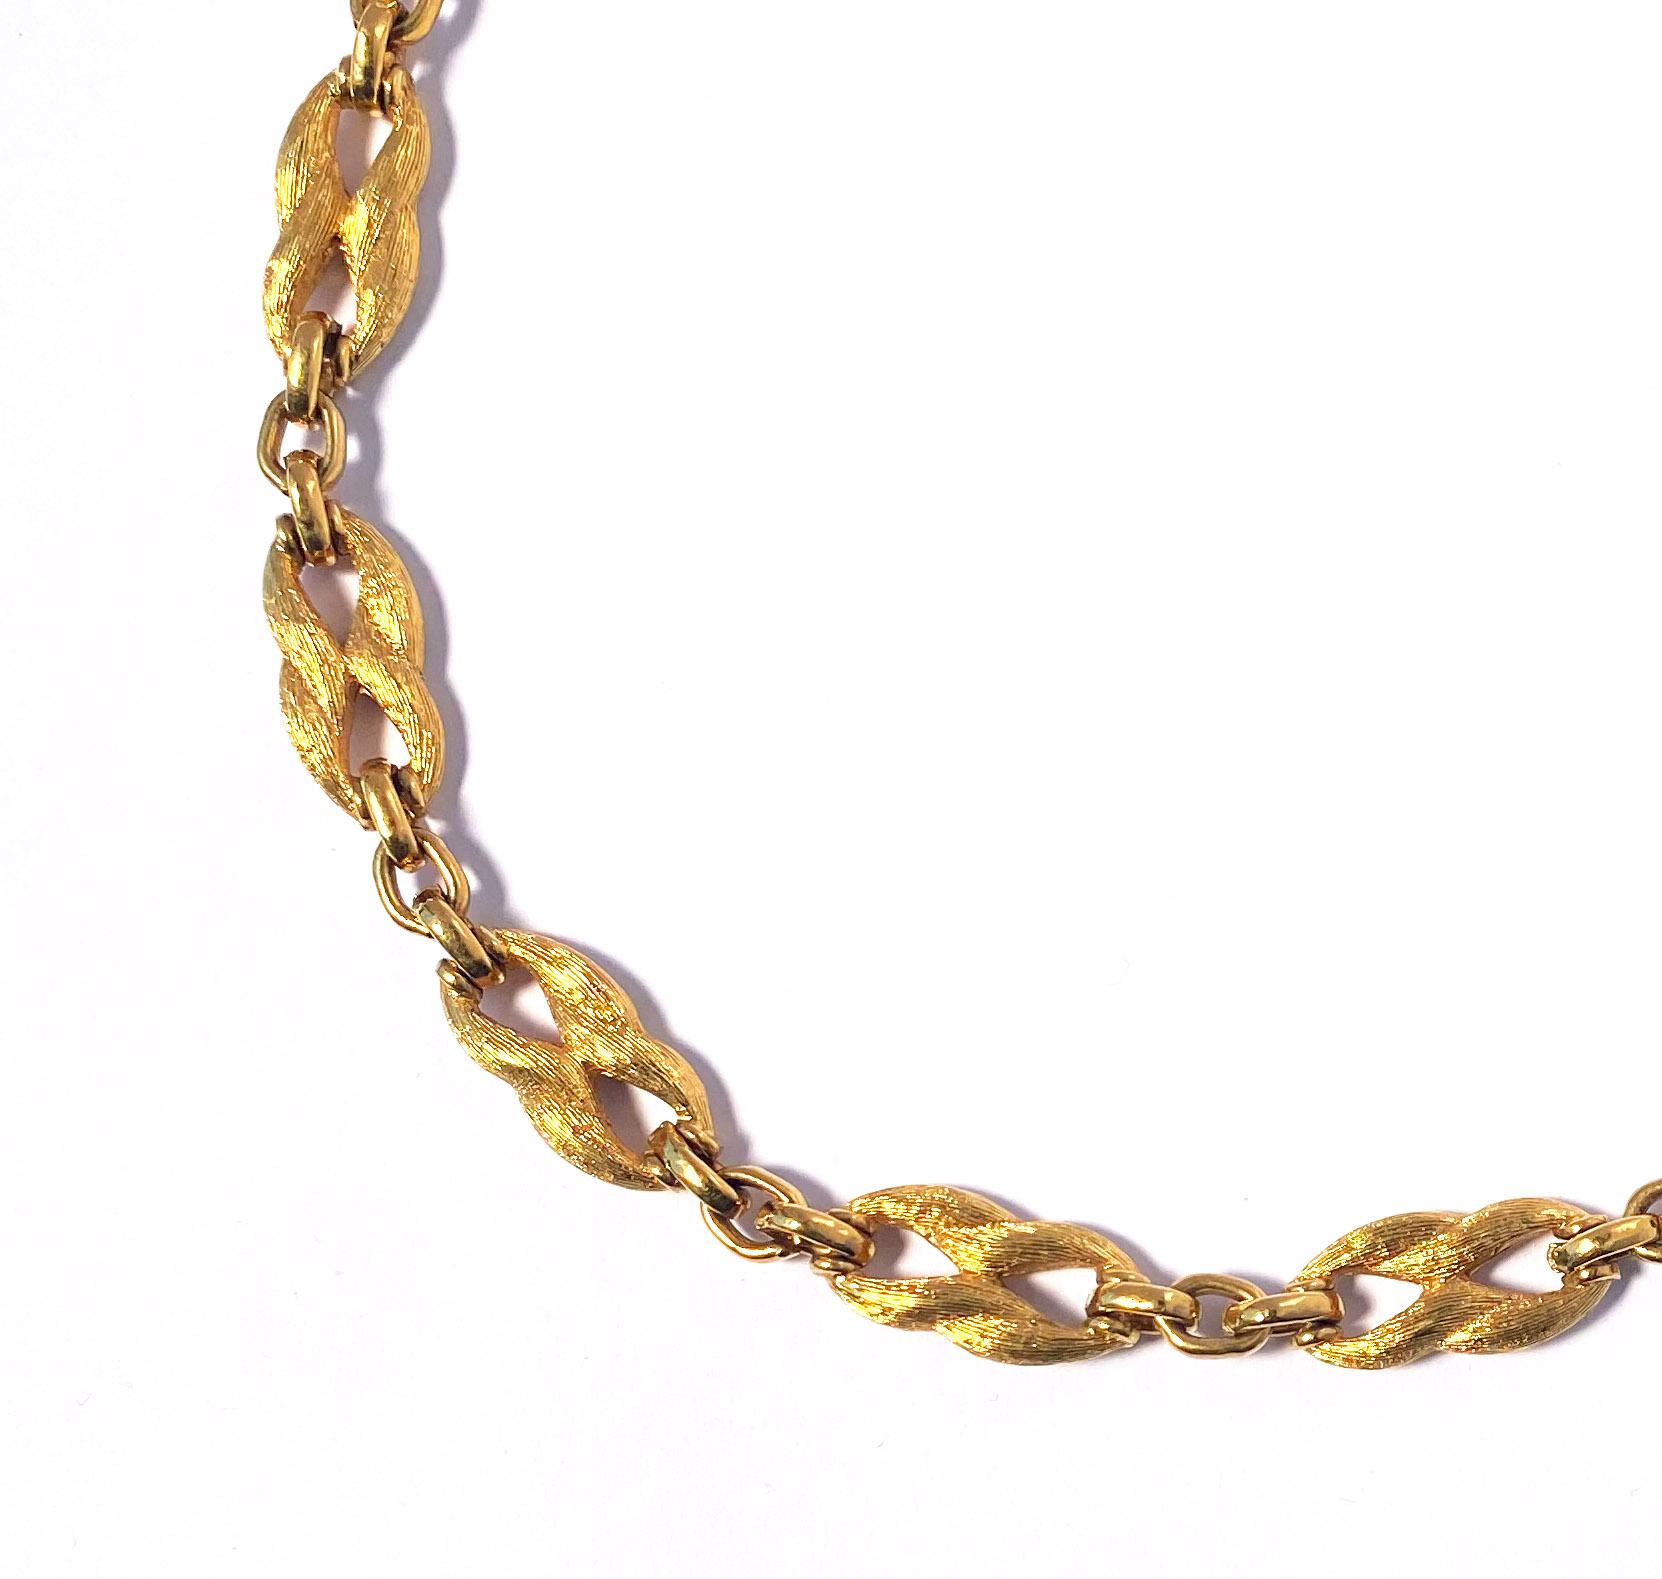 Vintage 1960s Christian Dior choker-length chain necklace in gold plate.  This necklace features elegant figure-8-shaped links with a unique wave-patterned lined texture, giving them a lustrous semi-matte finish.  The textured links alternate with